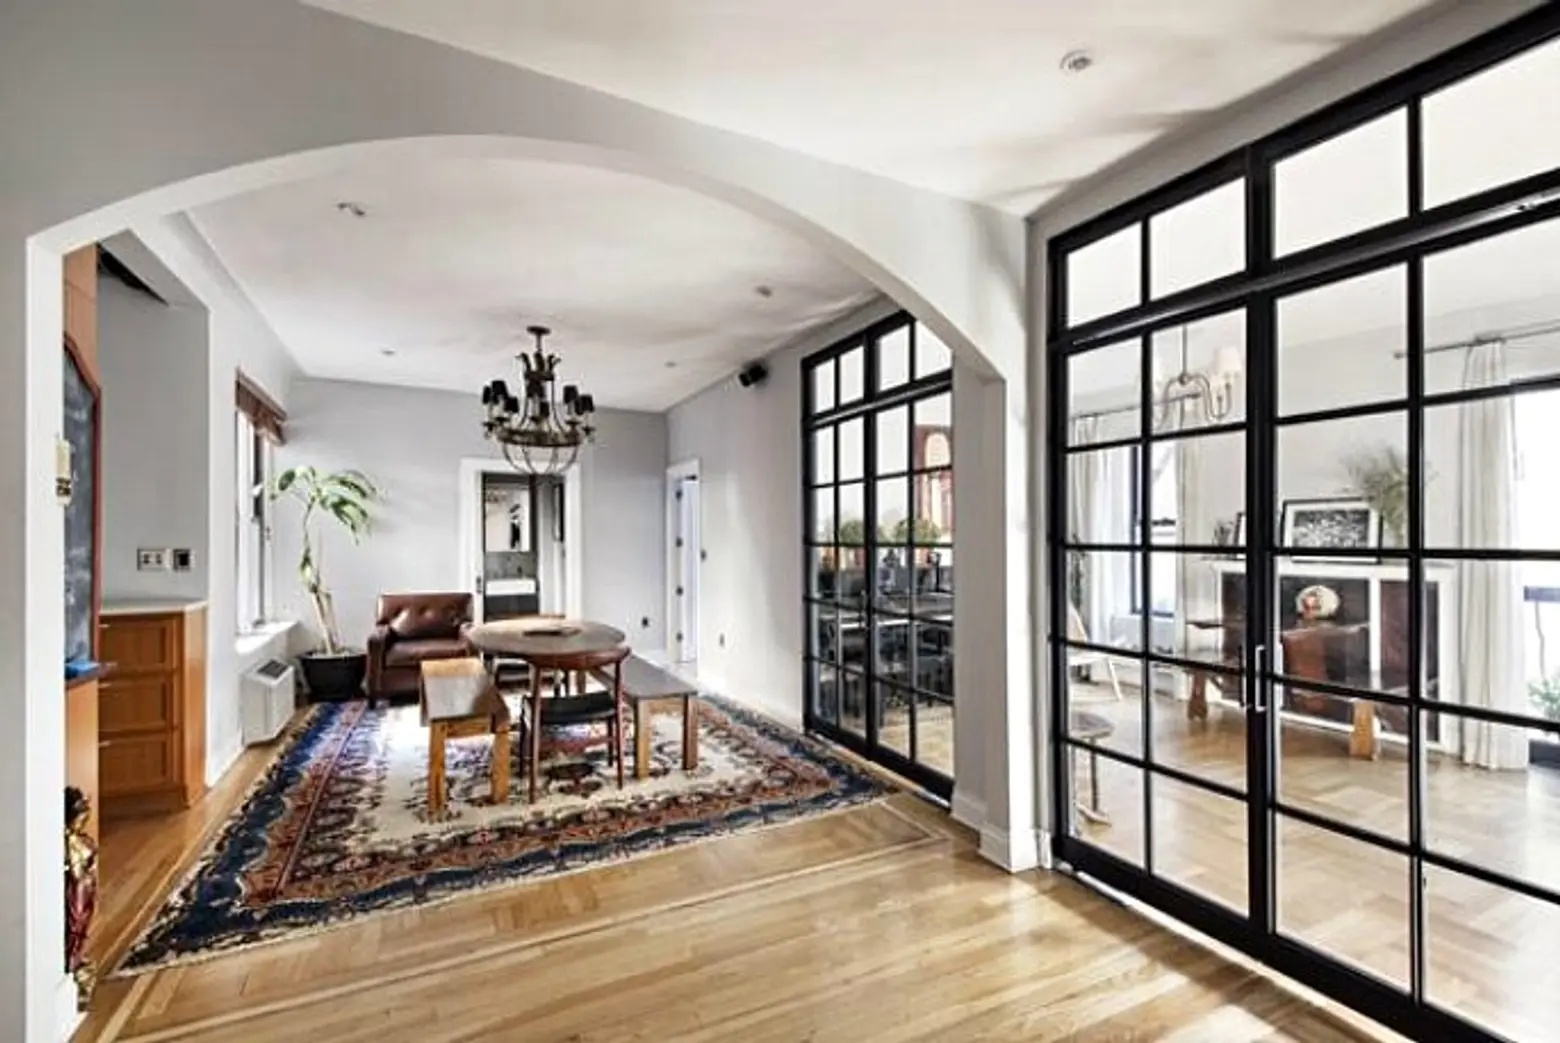 Supermodel Gemma Ward Sells Her E. Village Pad; More Transit Is the Key to More Affordable Housing